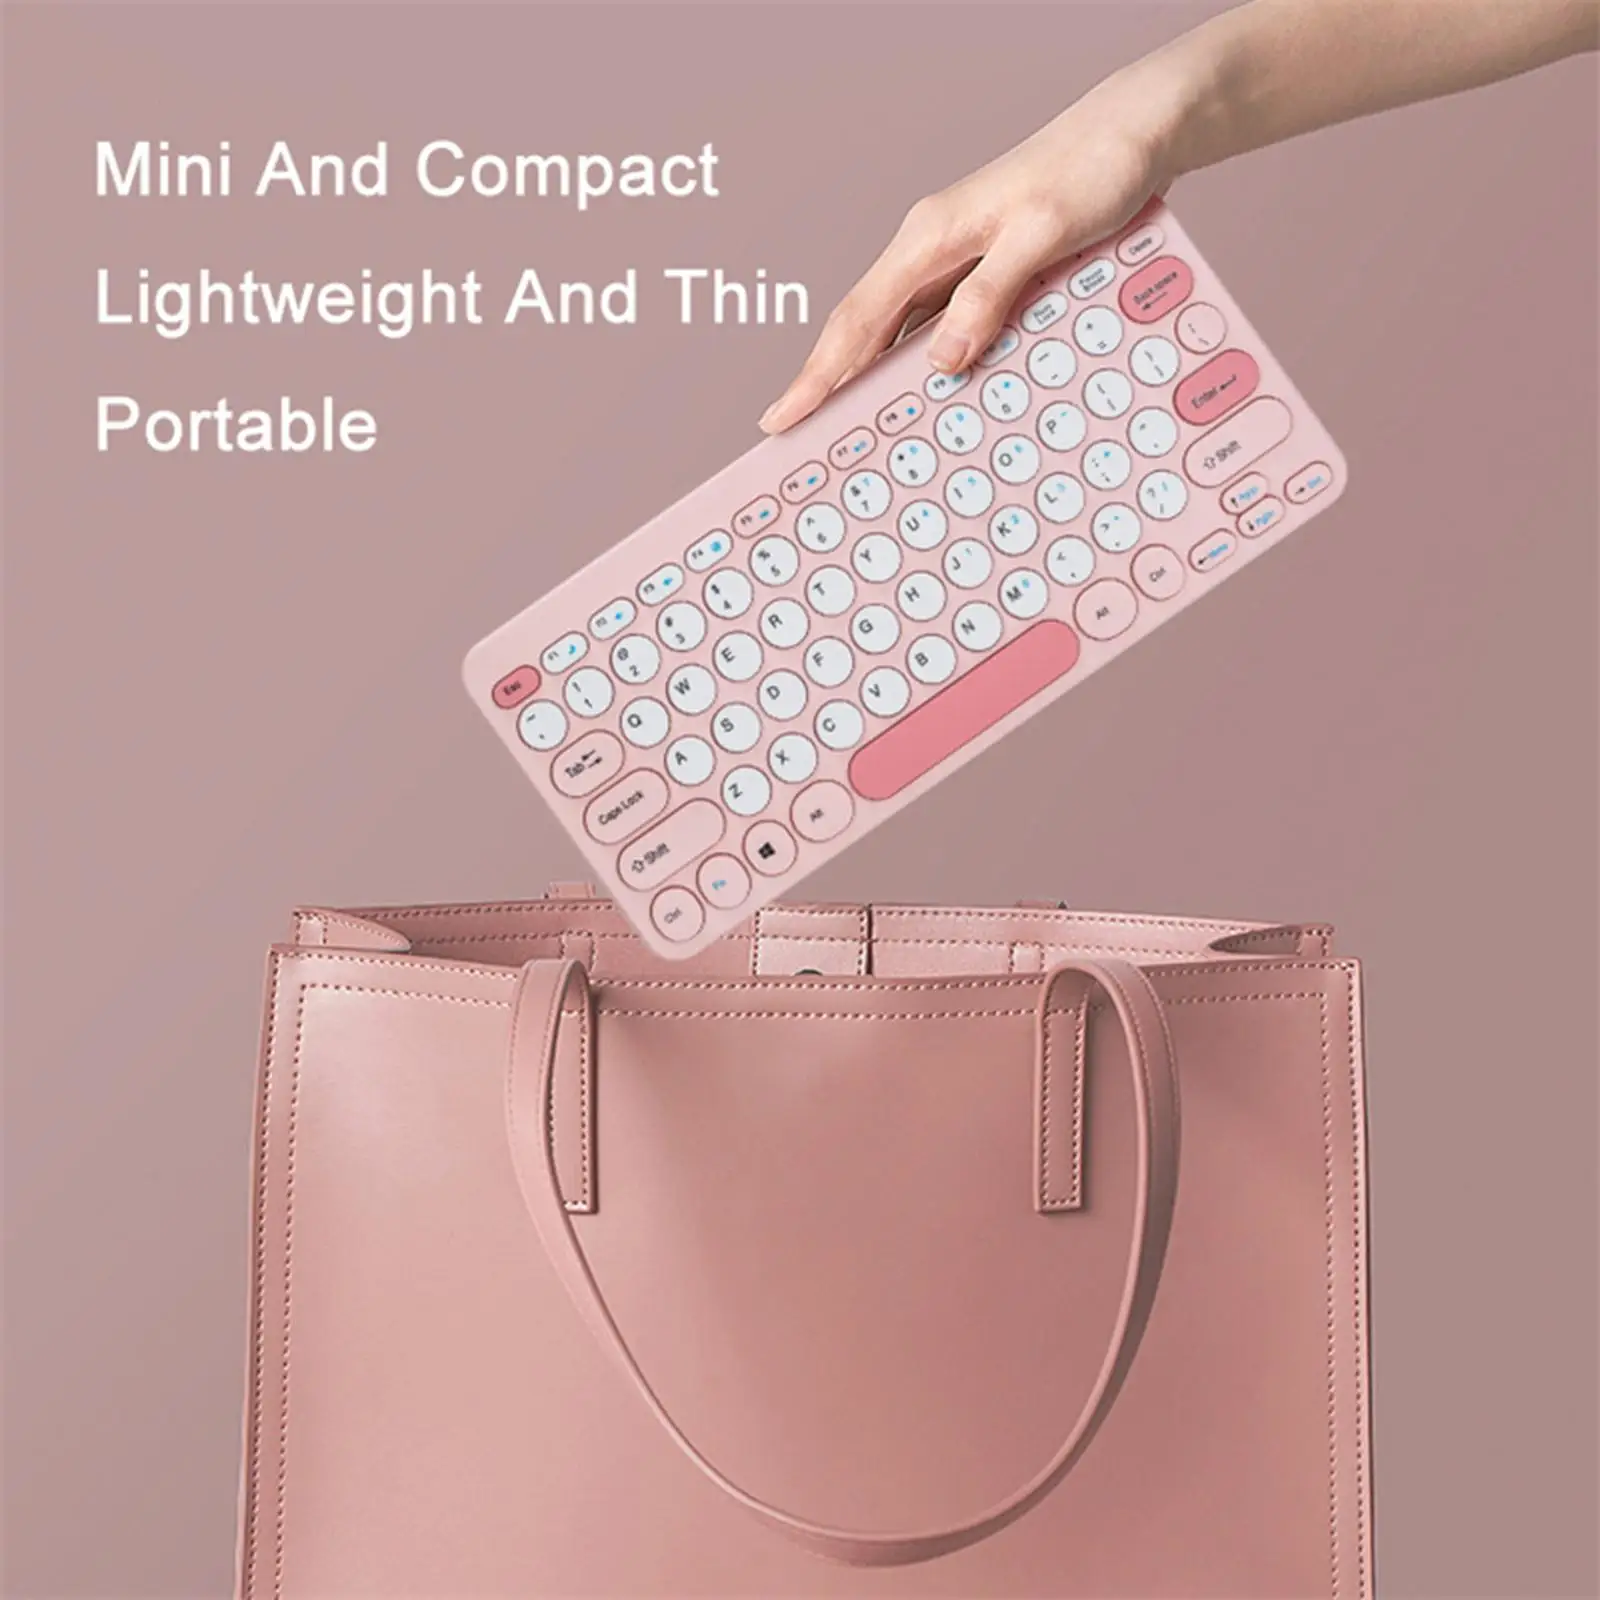 Mini Wireless Keyboard and Mouse Set and Quiet Click for Laptop PC Computer